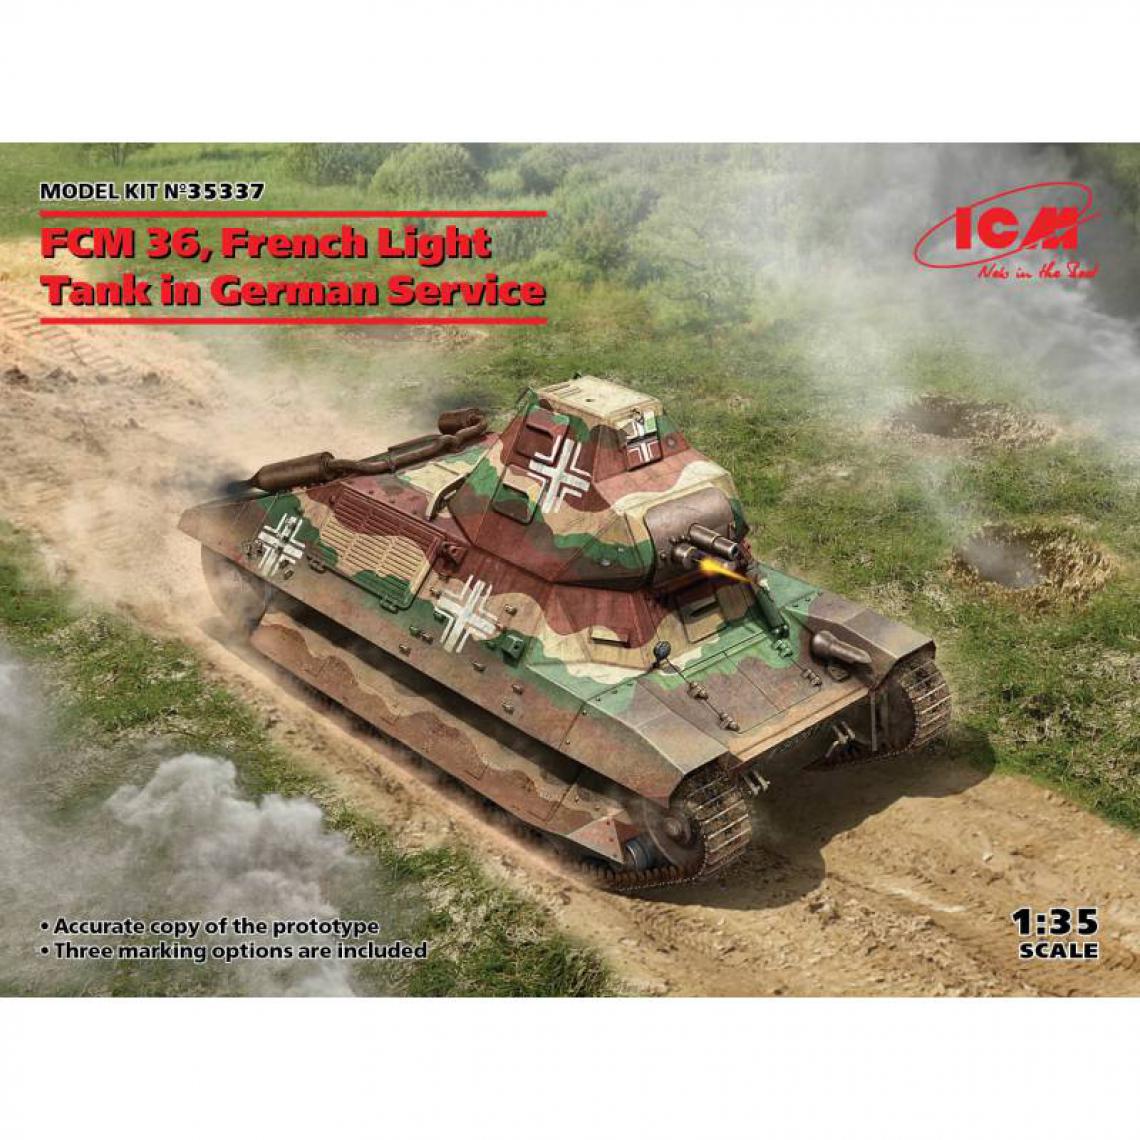 Icm - Maquette Char Fcm 36 French Light Tank In German Service - Chars